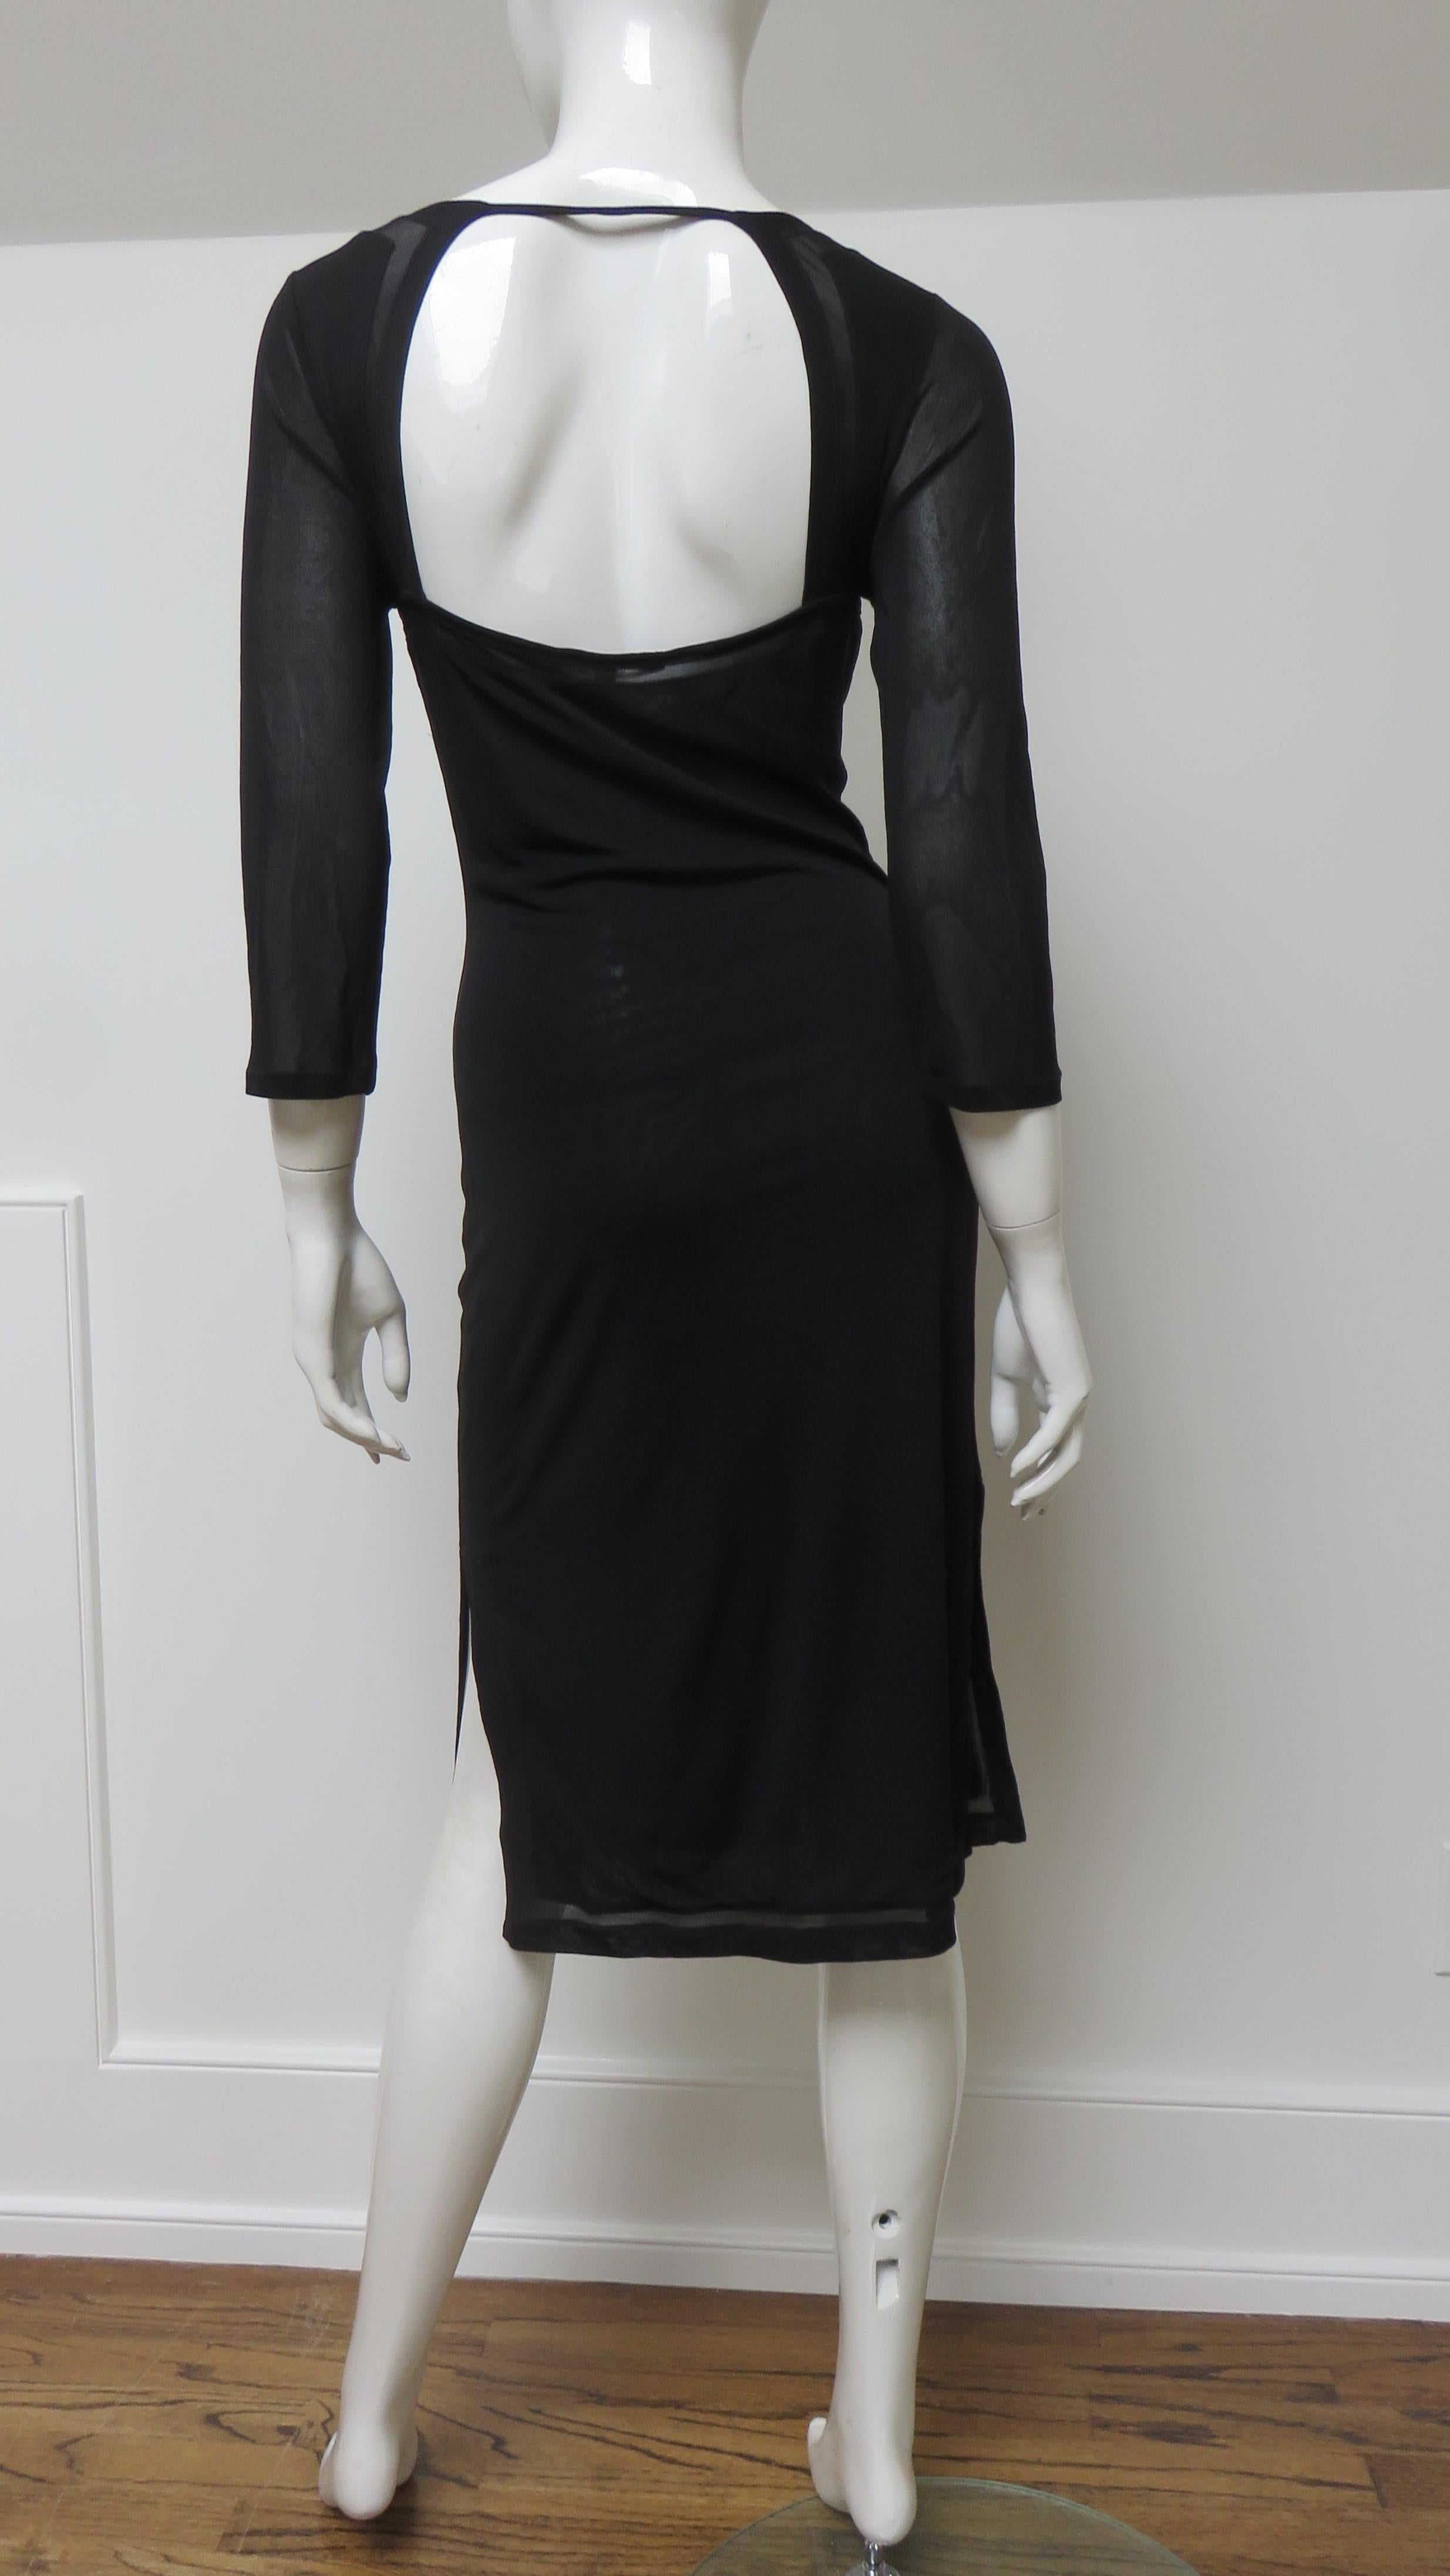 Tom Ford For Gucci Dress with Cut outs For Sale 6